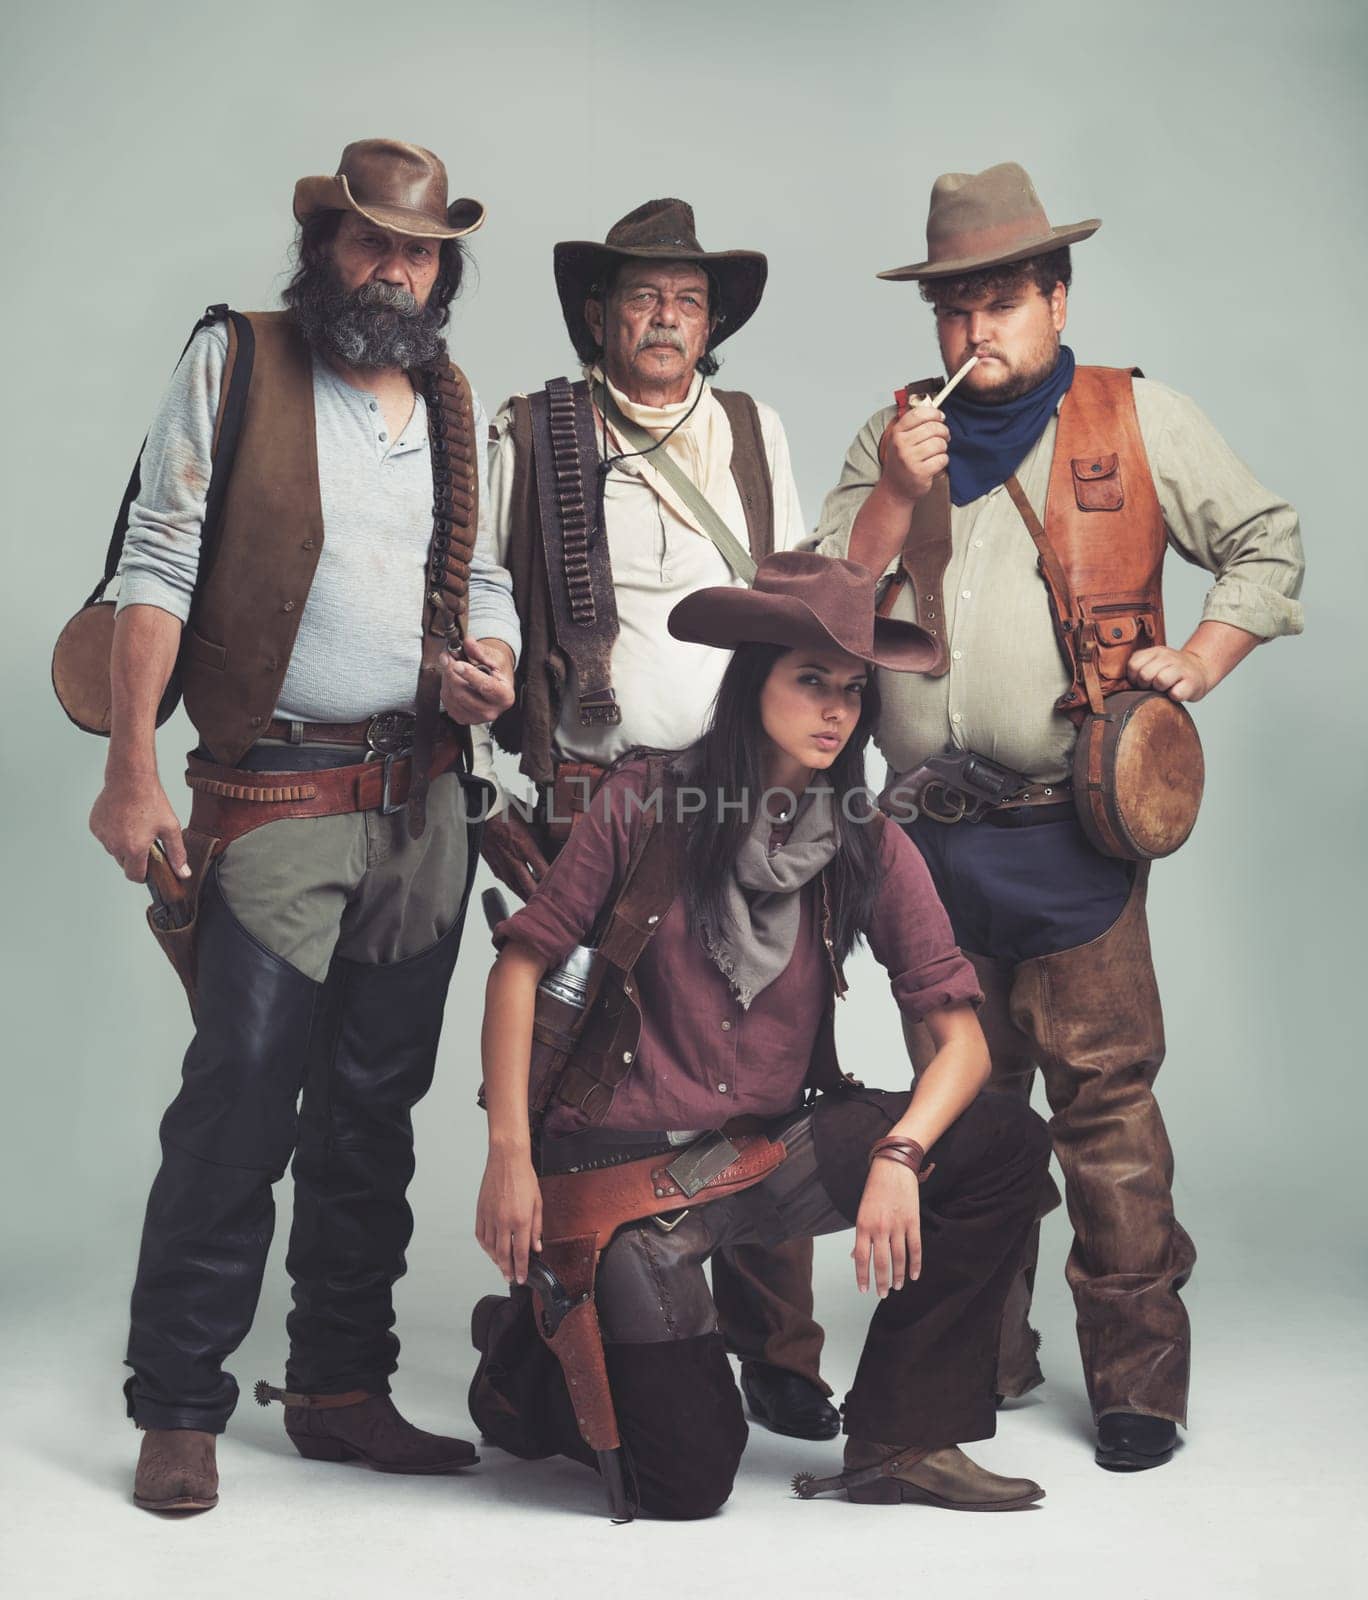 Vintage, western and portrait of cowboy in studio with fashion for halloween, costume and character. Man, woman and group of people with confidence for criminal, band and outlaw lifestyle together.